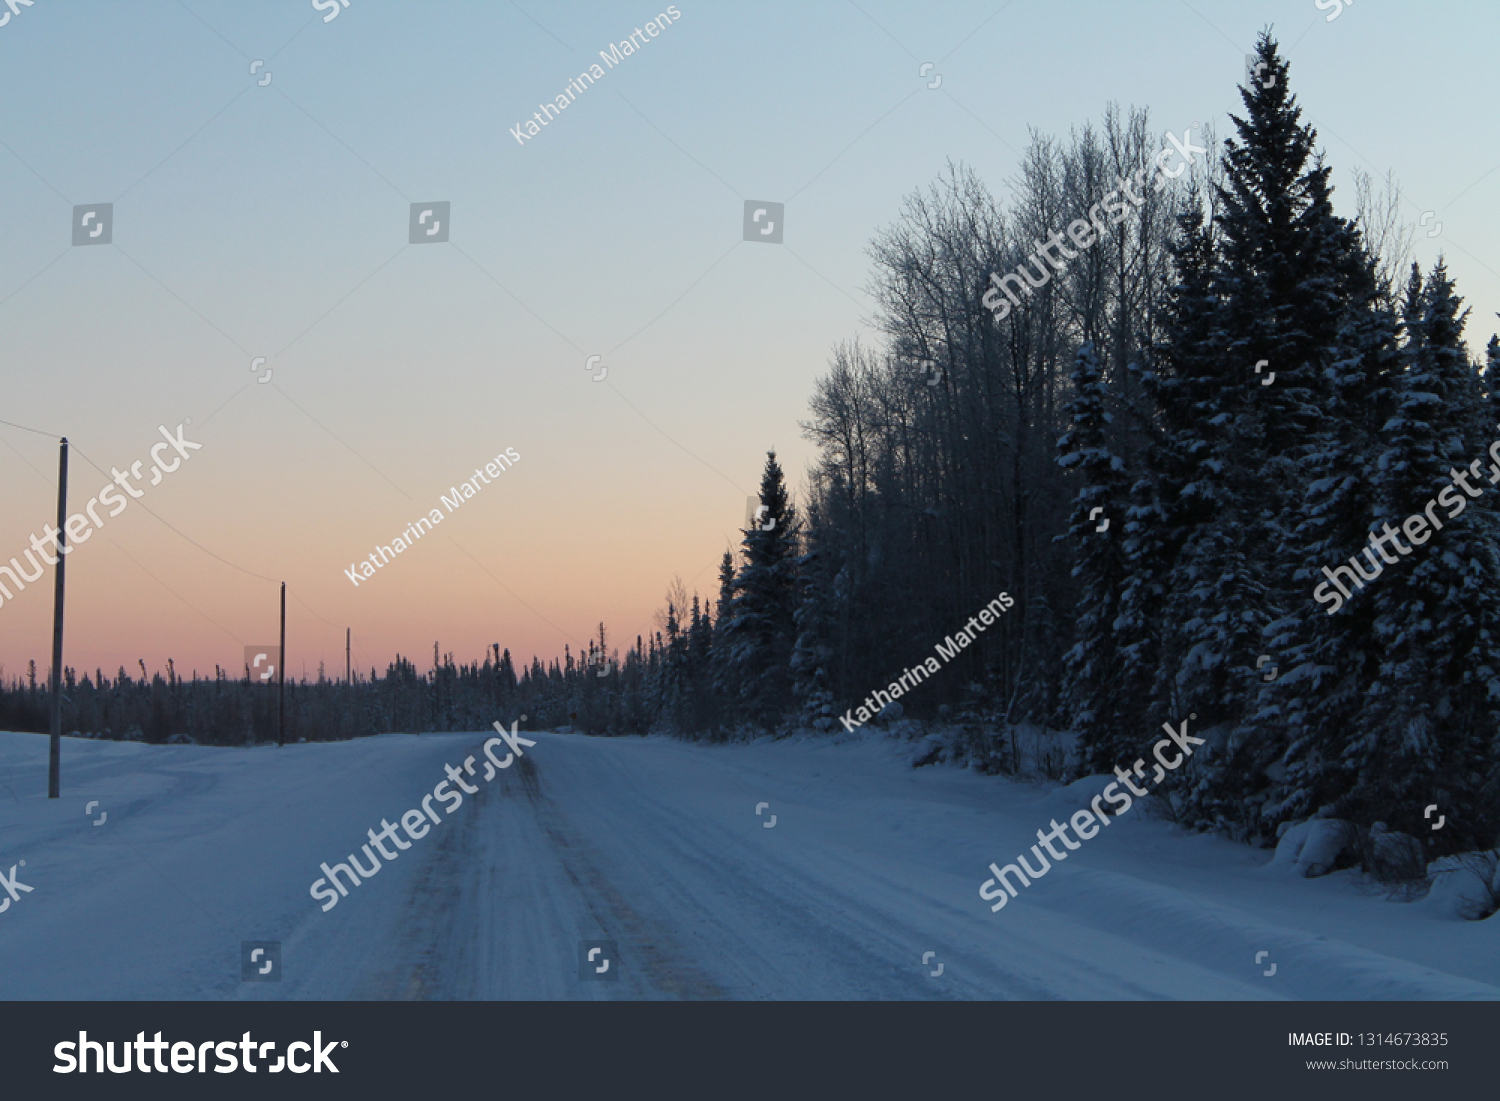 Rural winter road at dusk with the lower sky colored peach by the sunset, a dark mass of evergreen and leafless poplar trees to the right of the road and a row of electrical poles along the left side. #1314673835